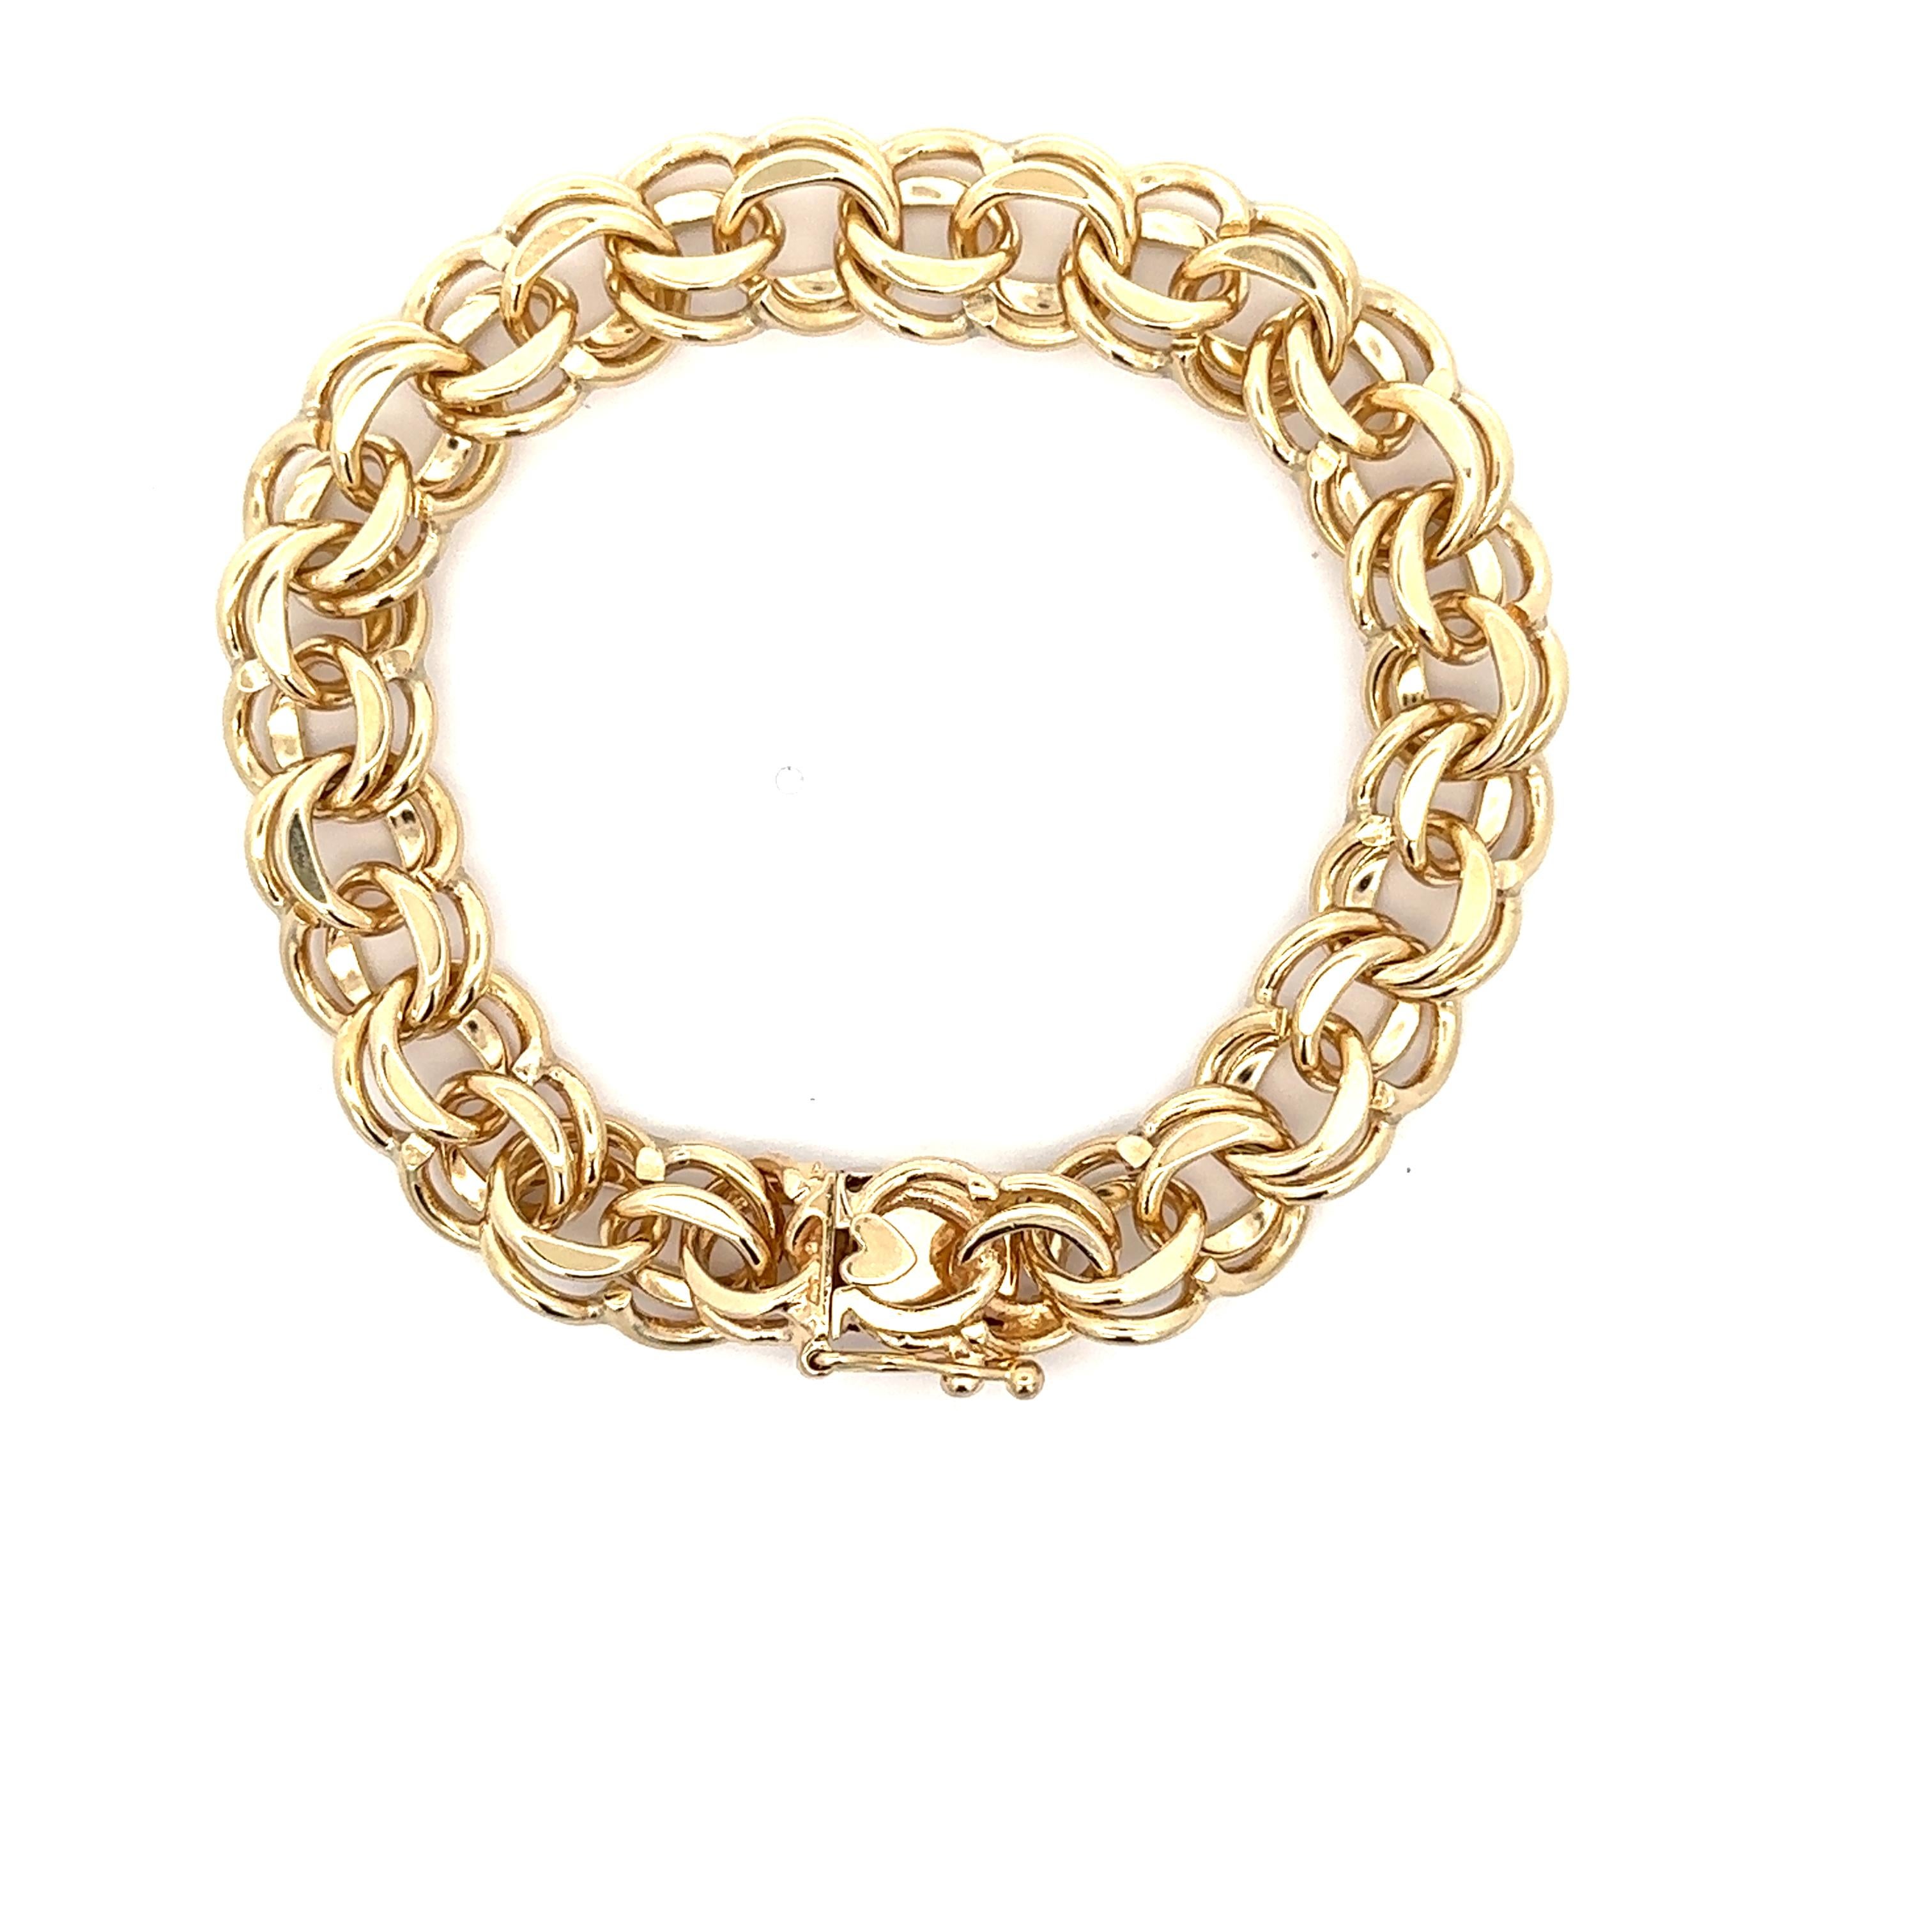 Vintage Solid 14K Yellow Gold 7.5